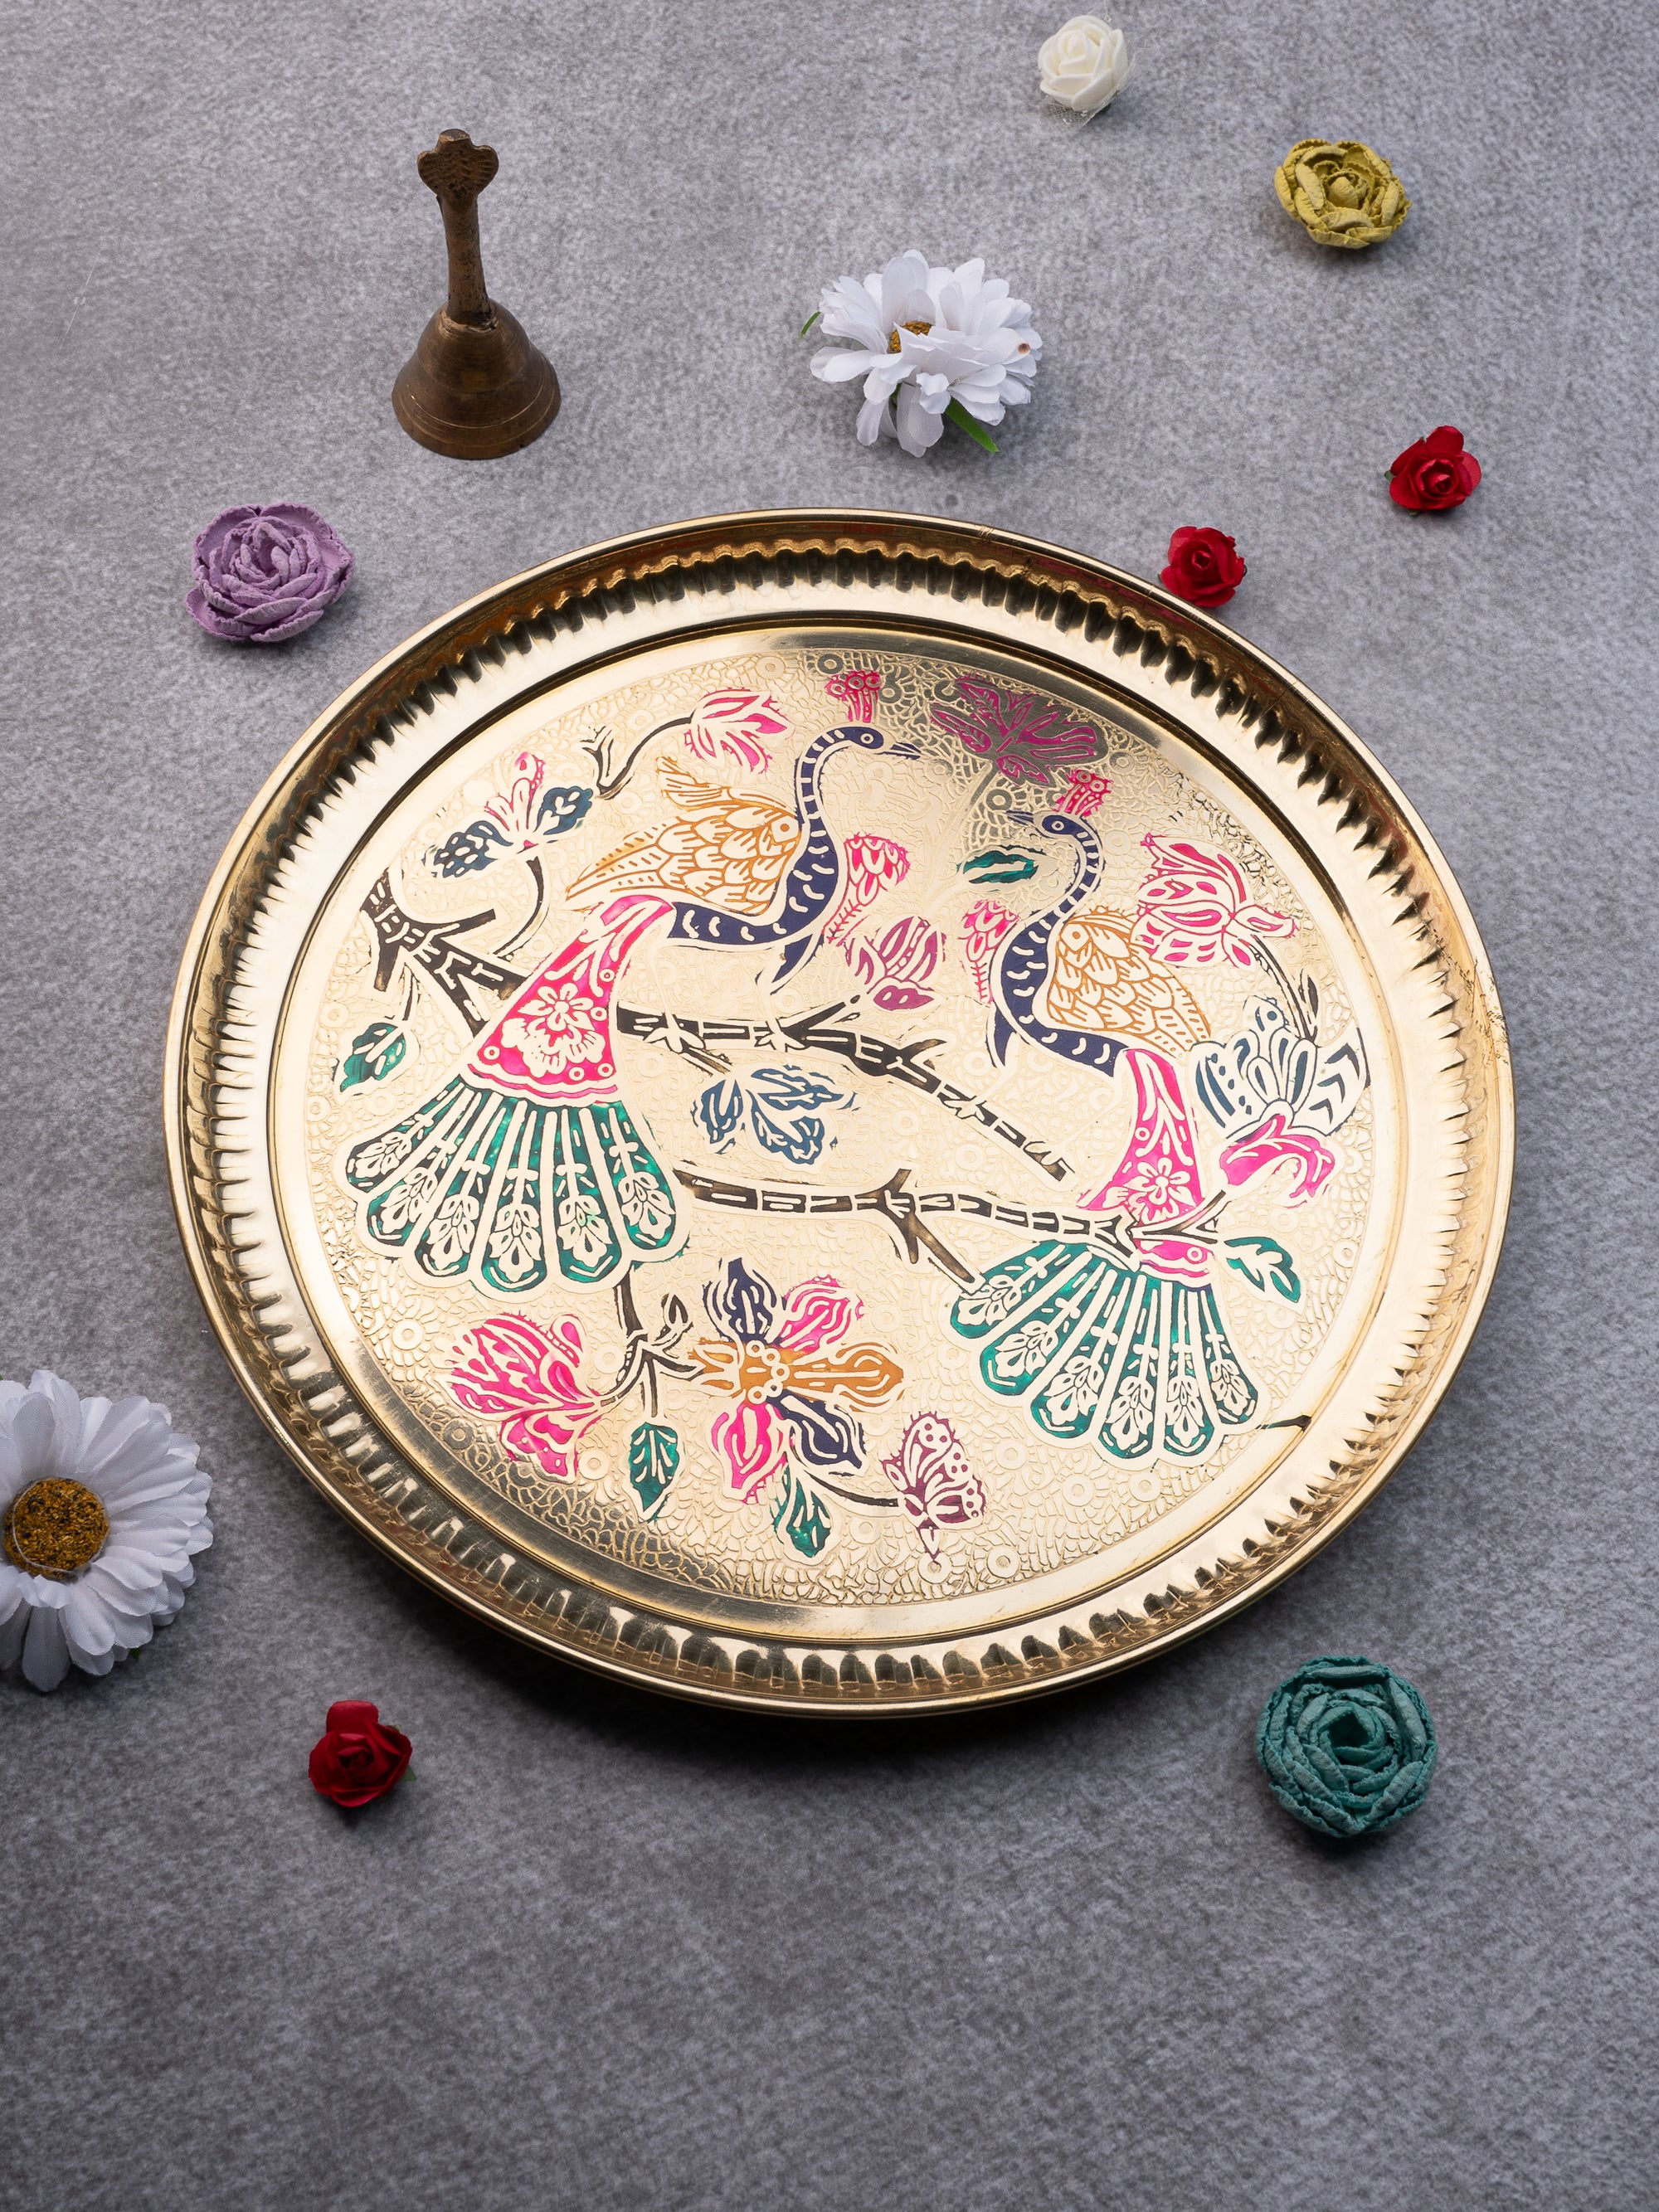 Handcrafted Brass Plate with Colorful Peacock Design - 10 inches